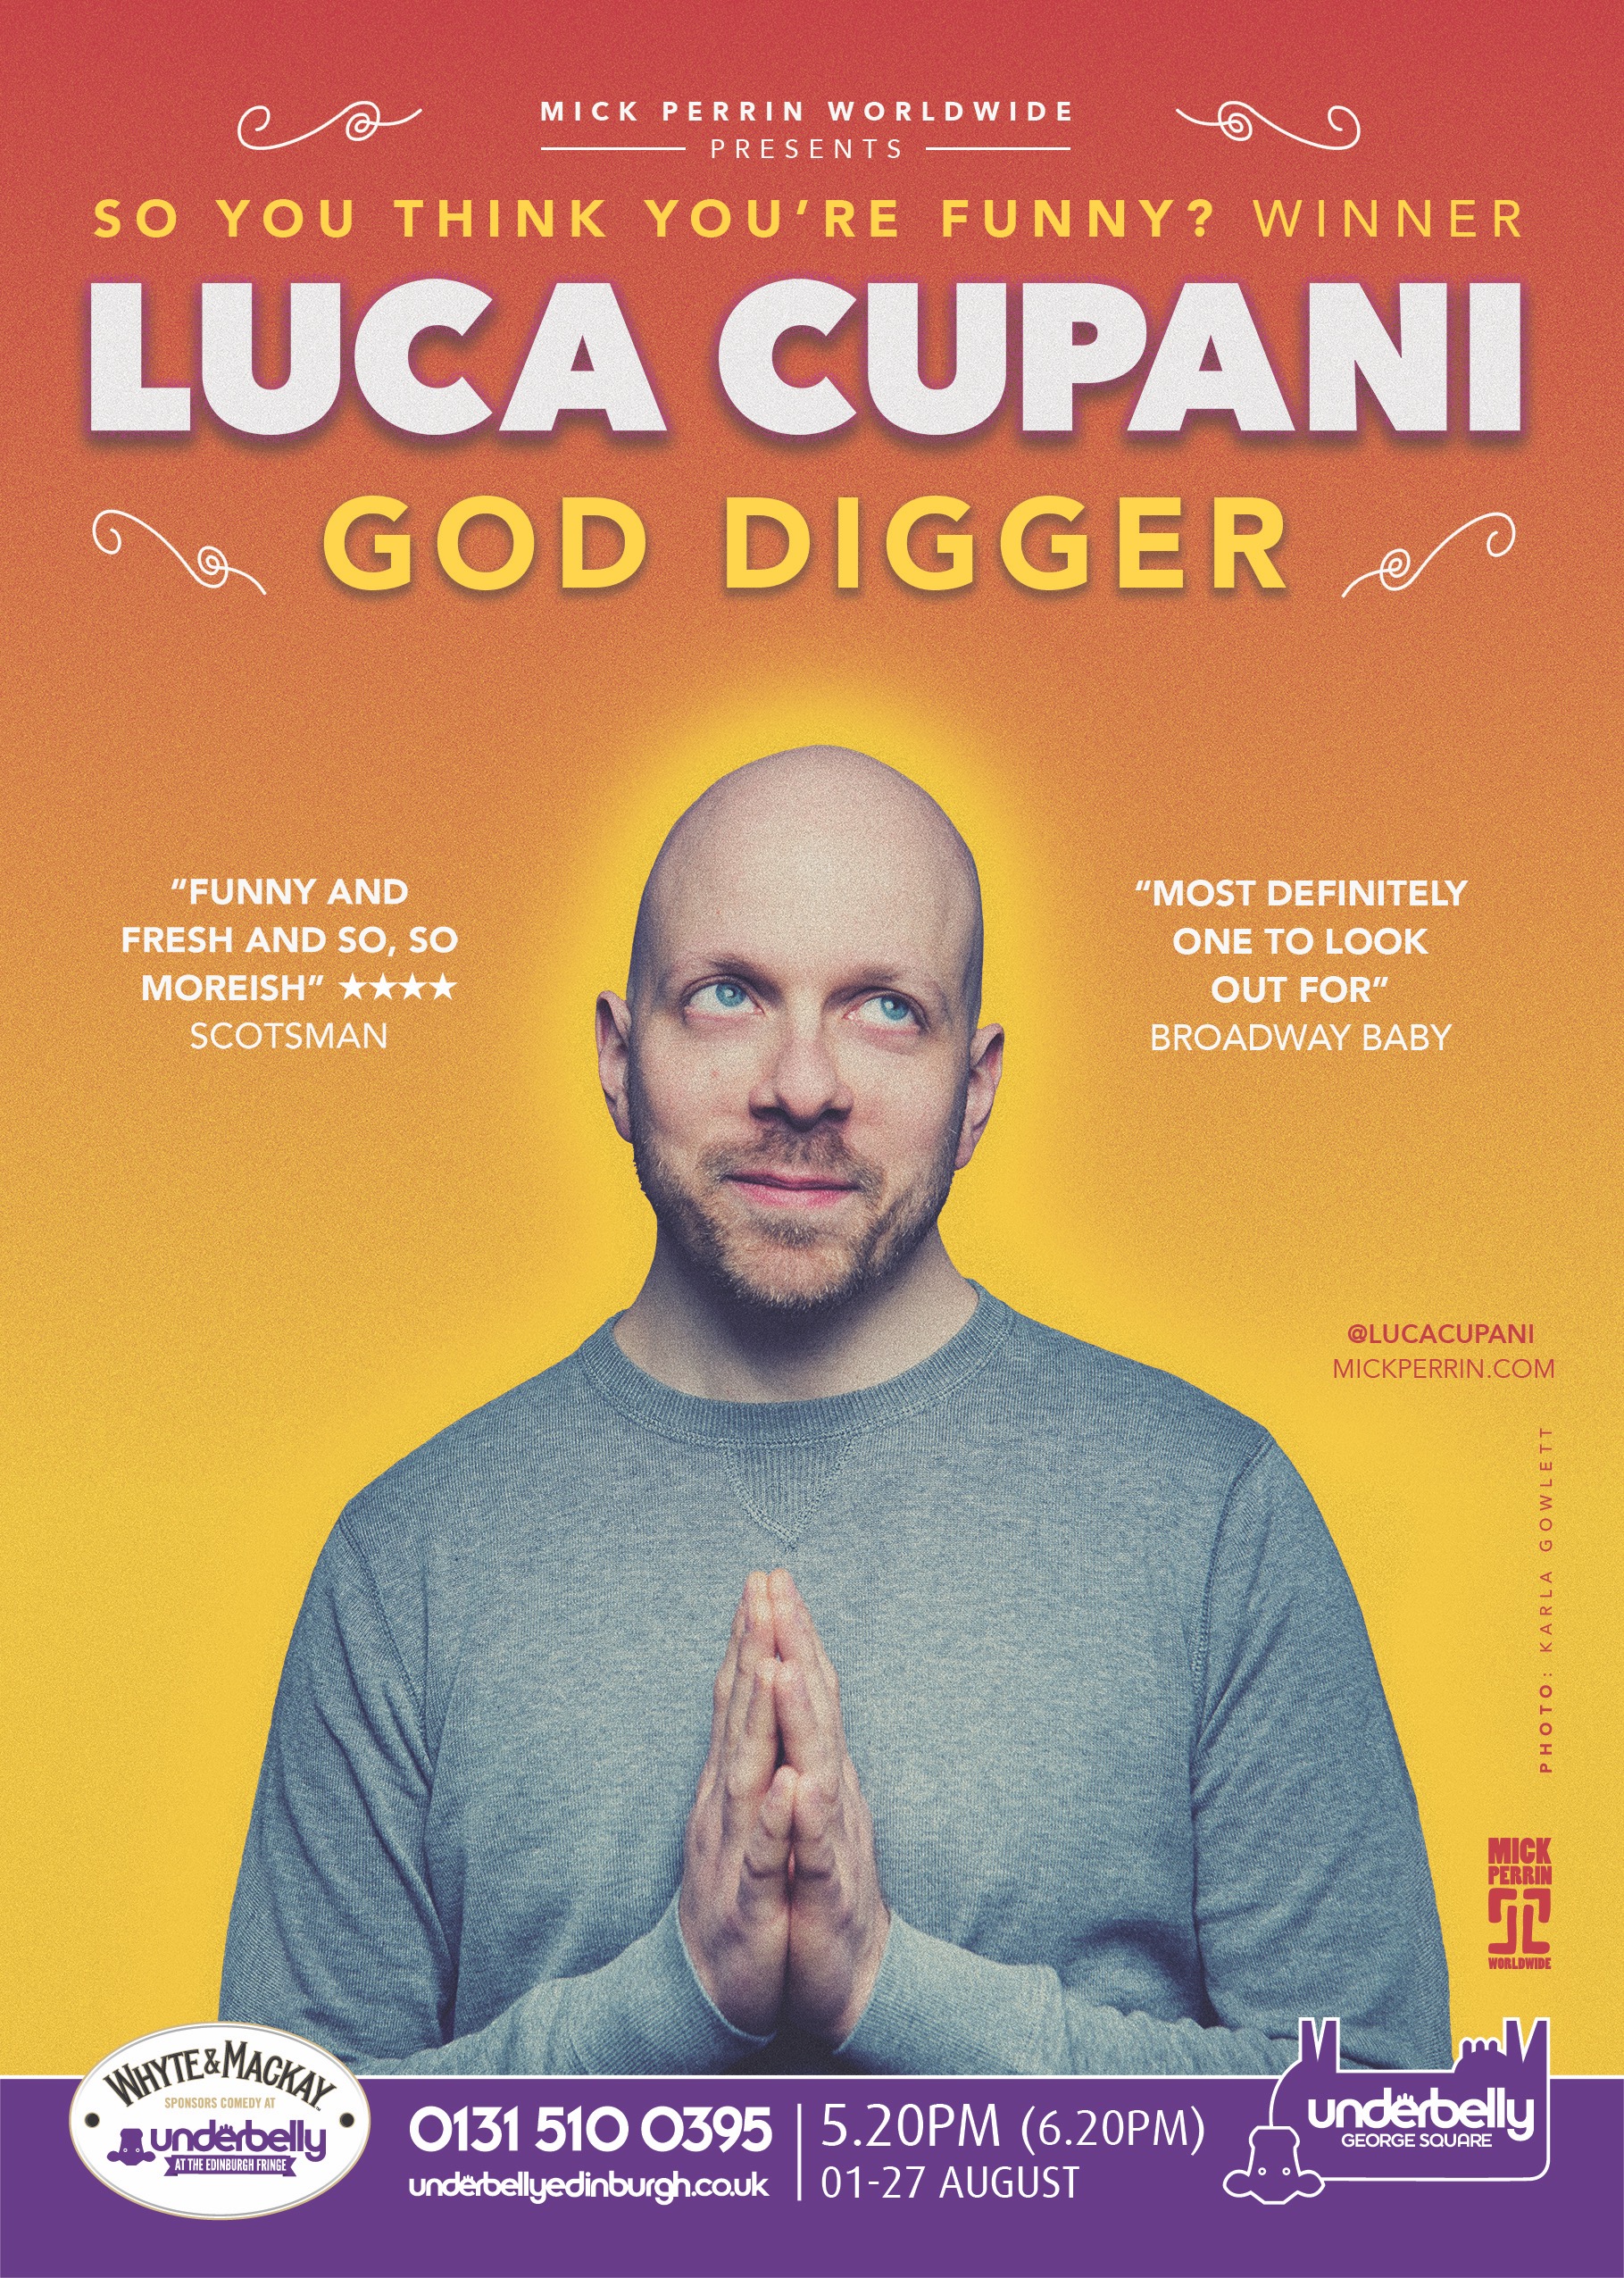 The poster for Luca Cupani: God Digger